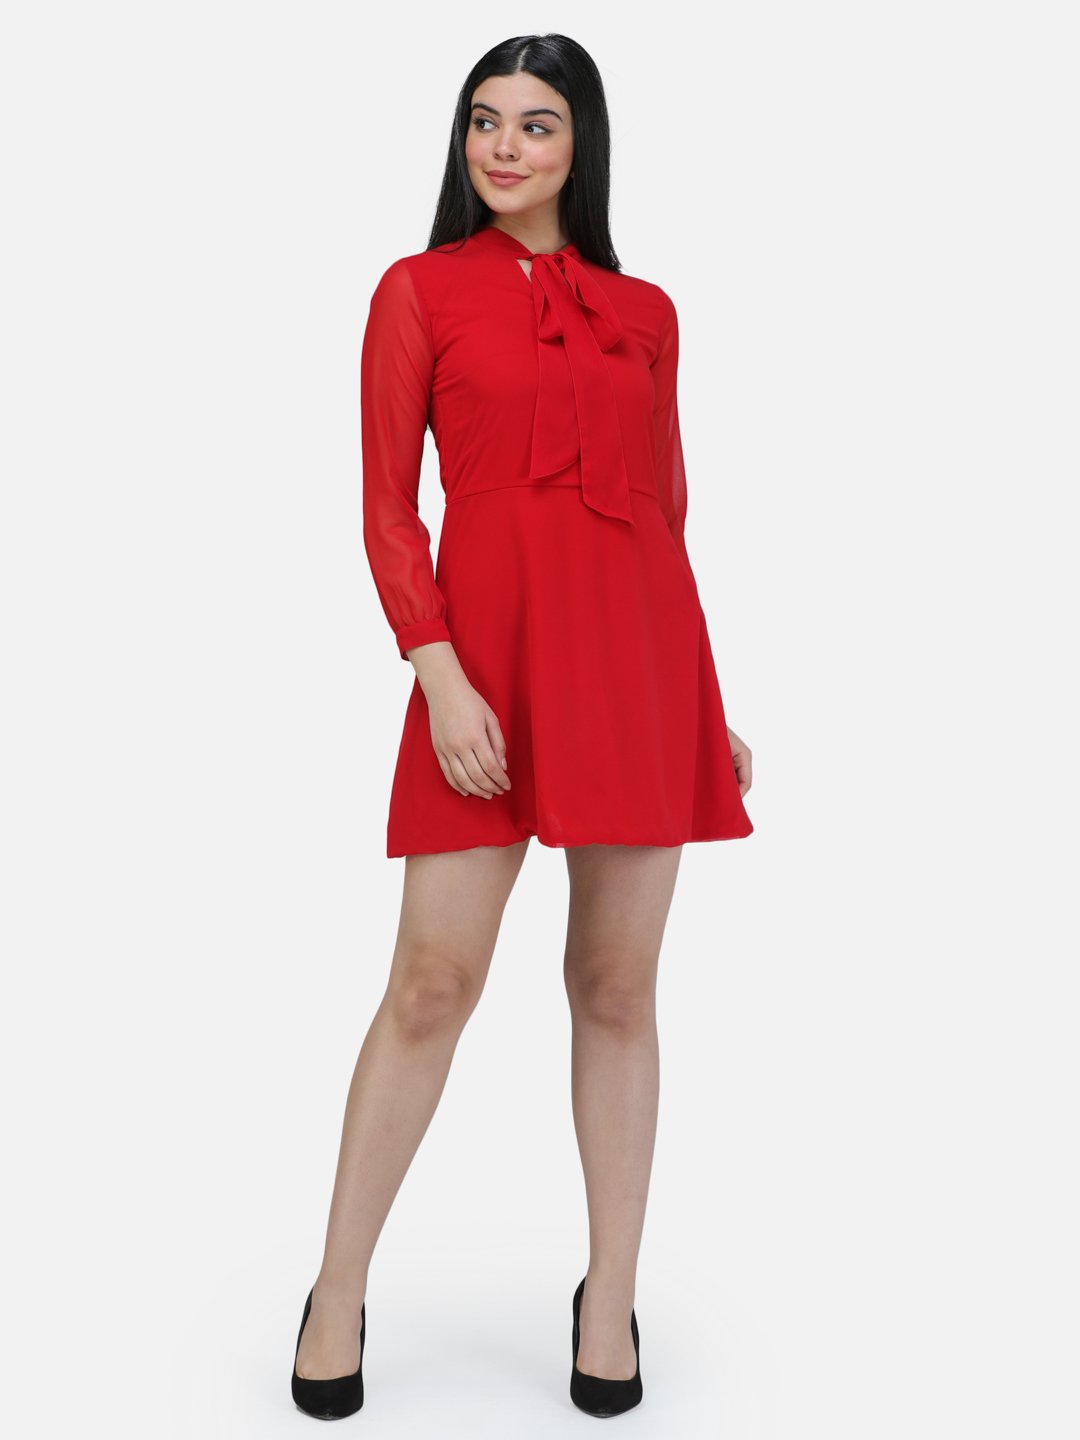 SCORPIUS Red front knot Mini Dress